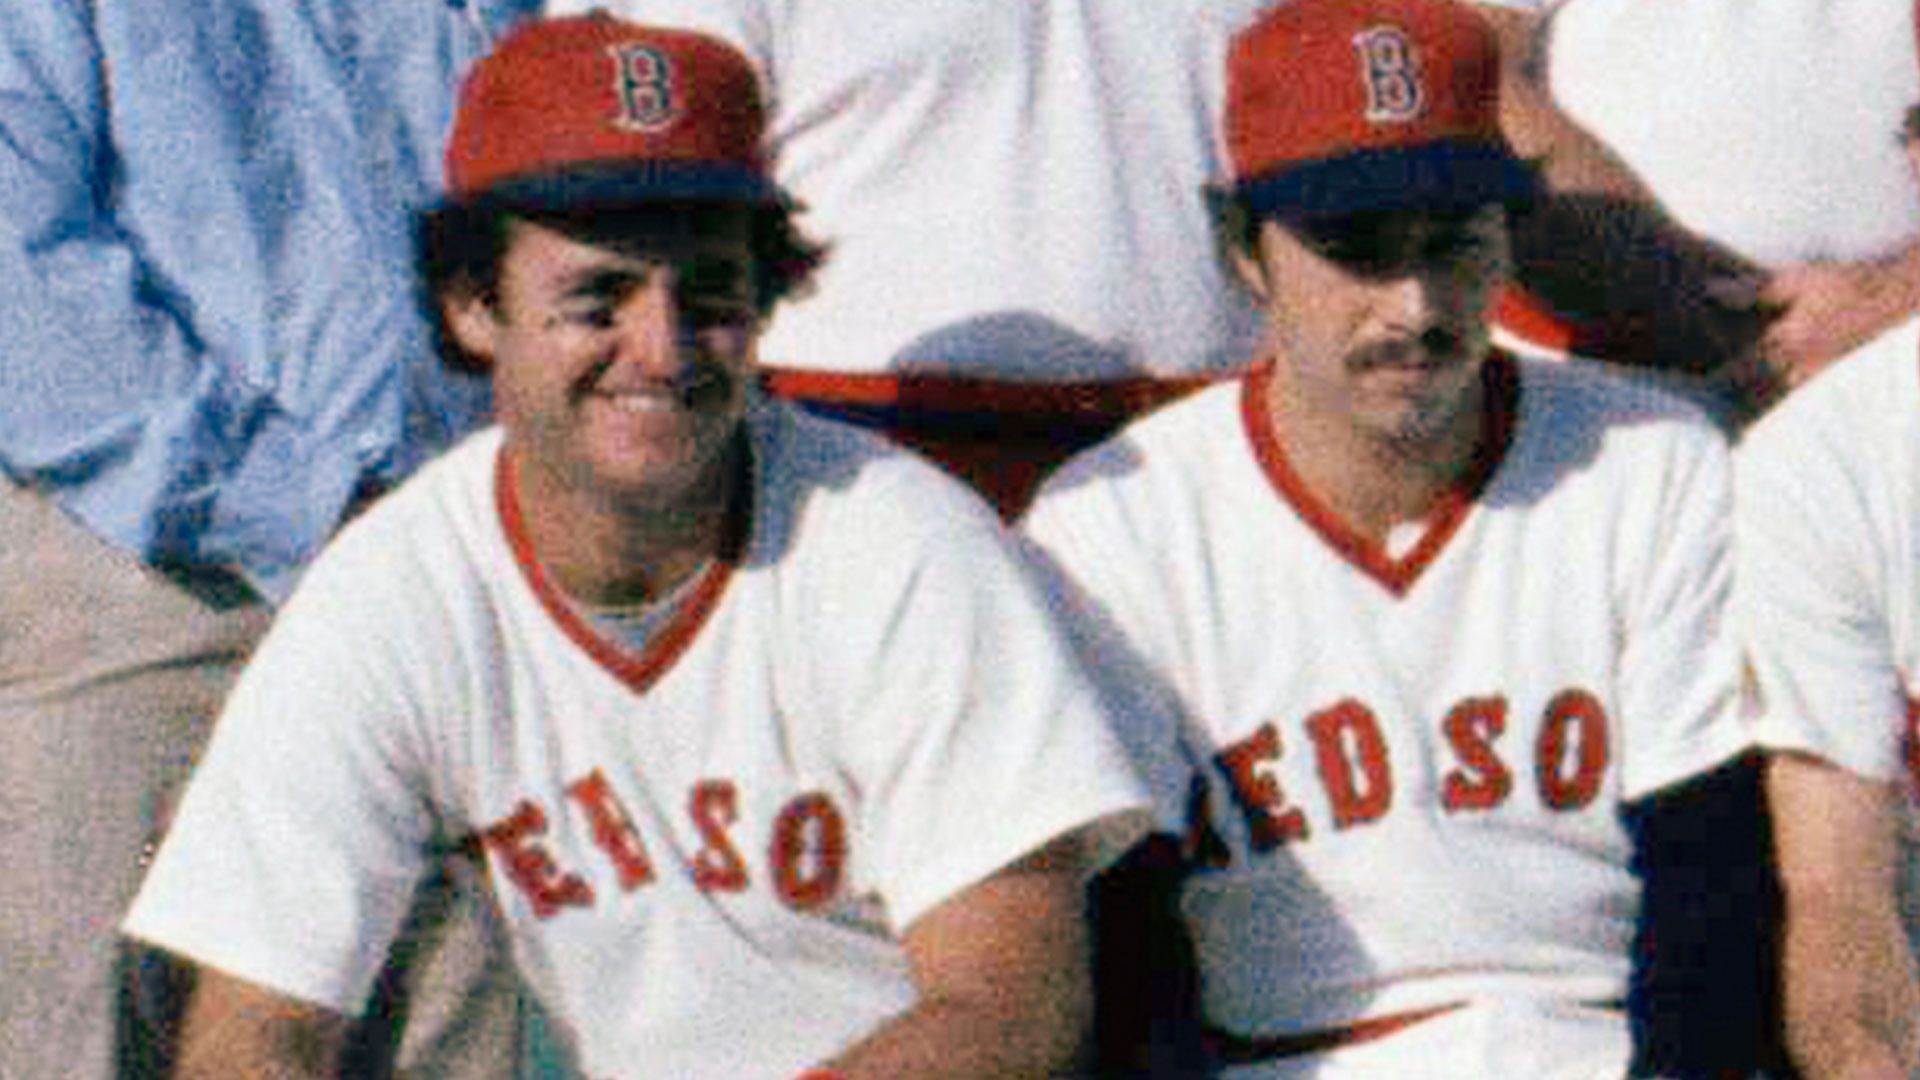 Red Sox players to wear commemorative patch in tribute to Jerry Remy